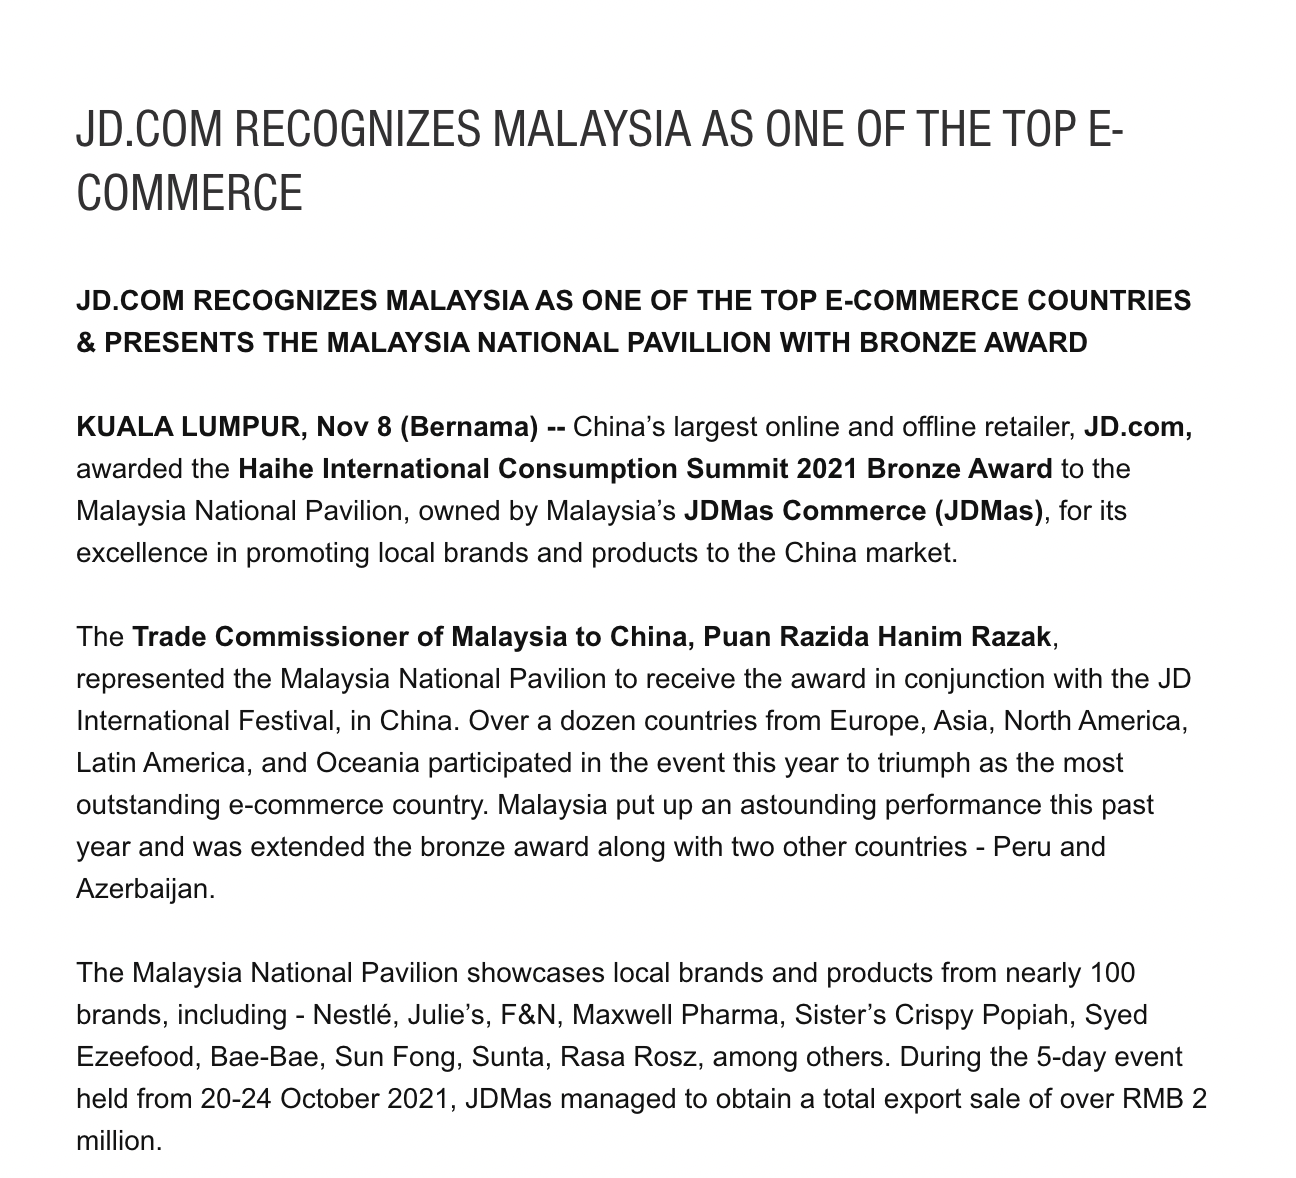 JD.com Recognizes Malaysia As One of The Top E-Commerce Countries & Presents The Malaysia National Pavillion With Bronze Award (News2u)